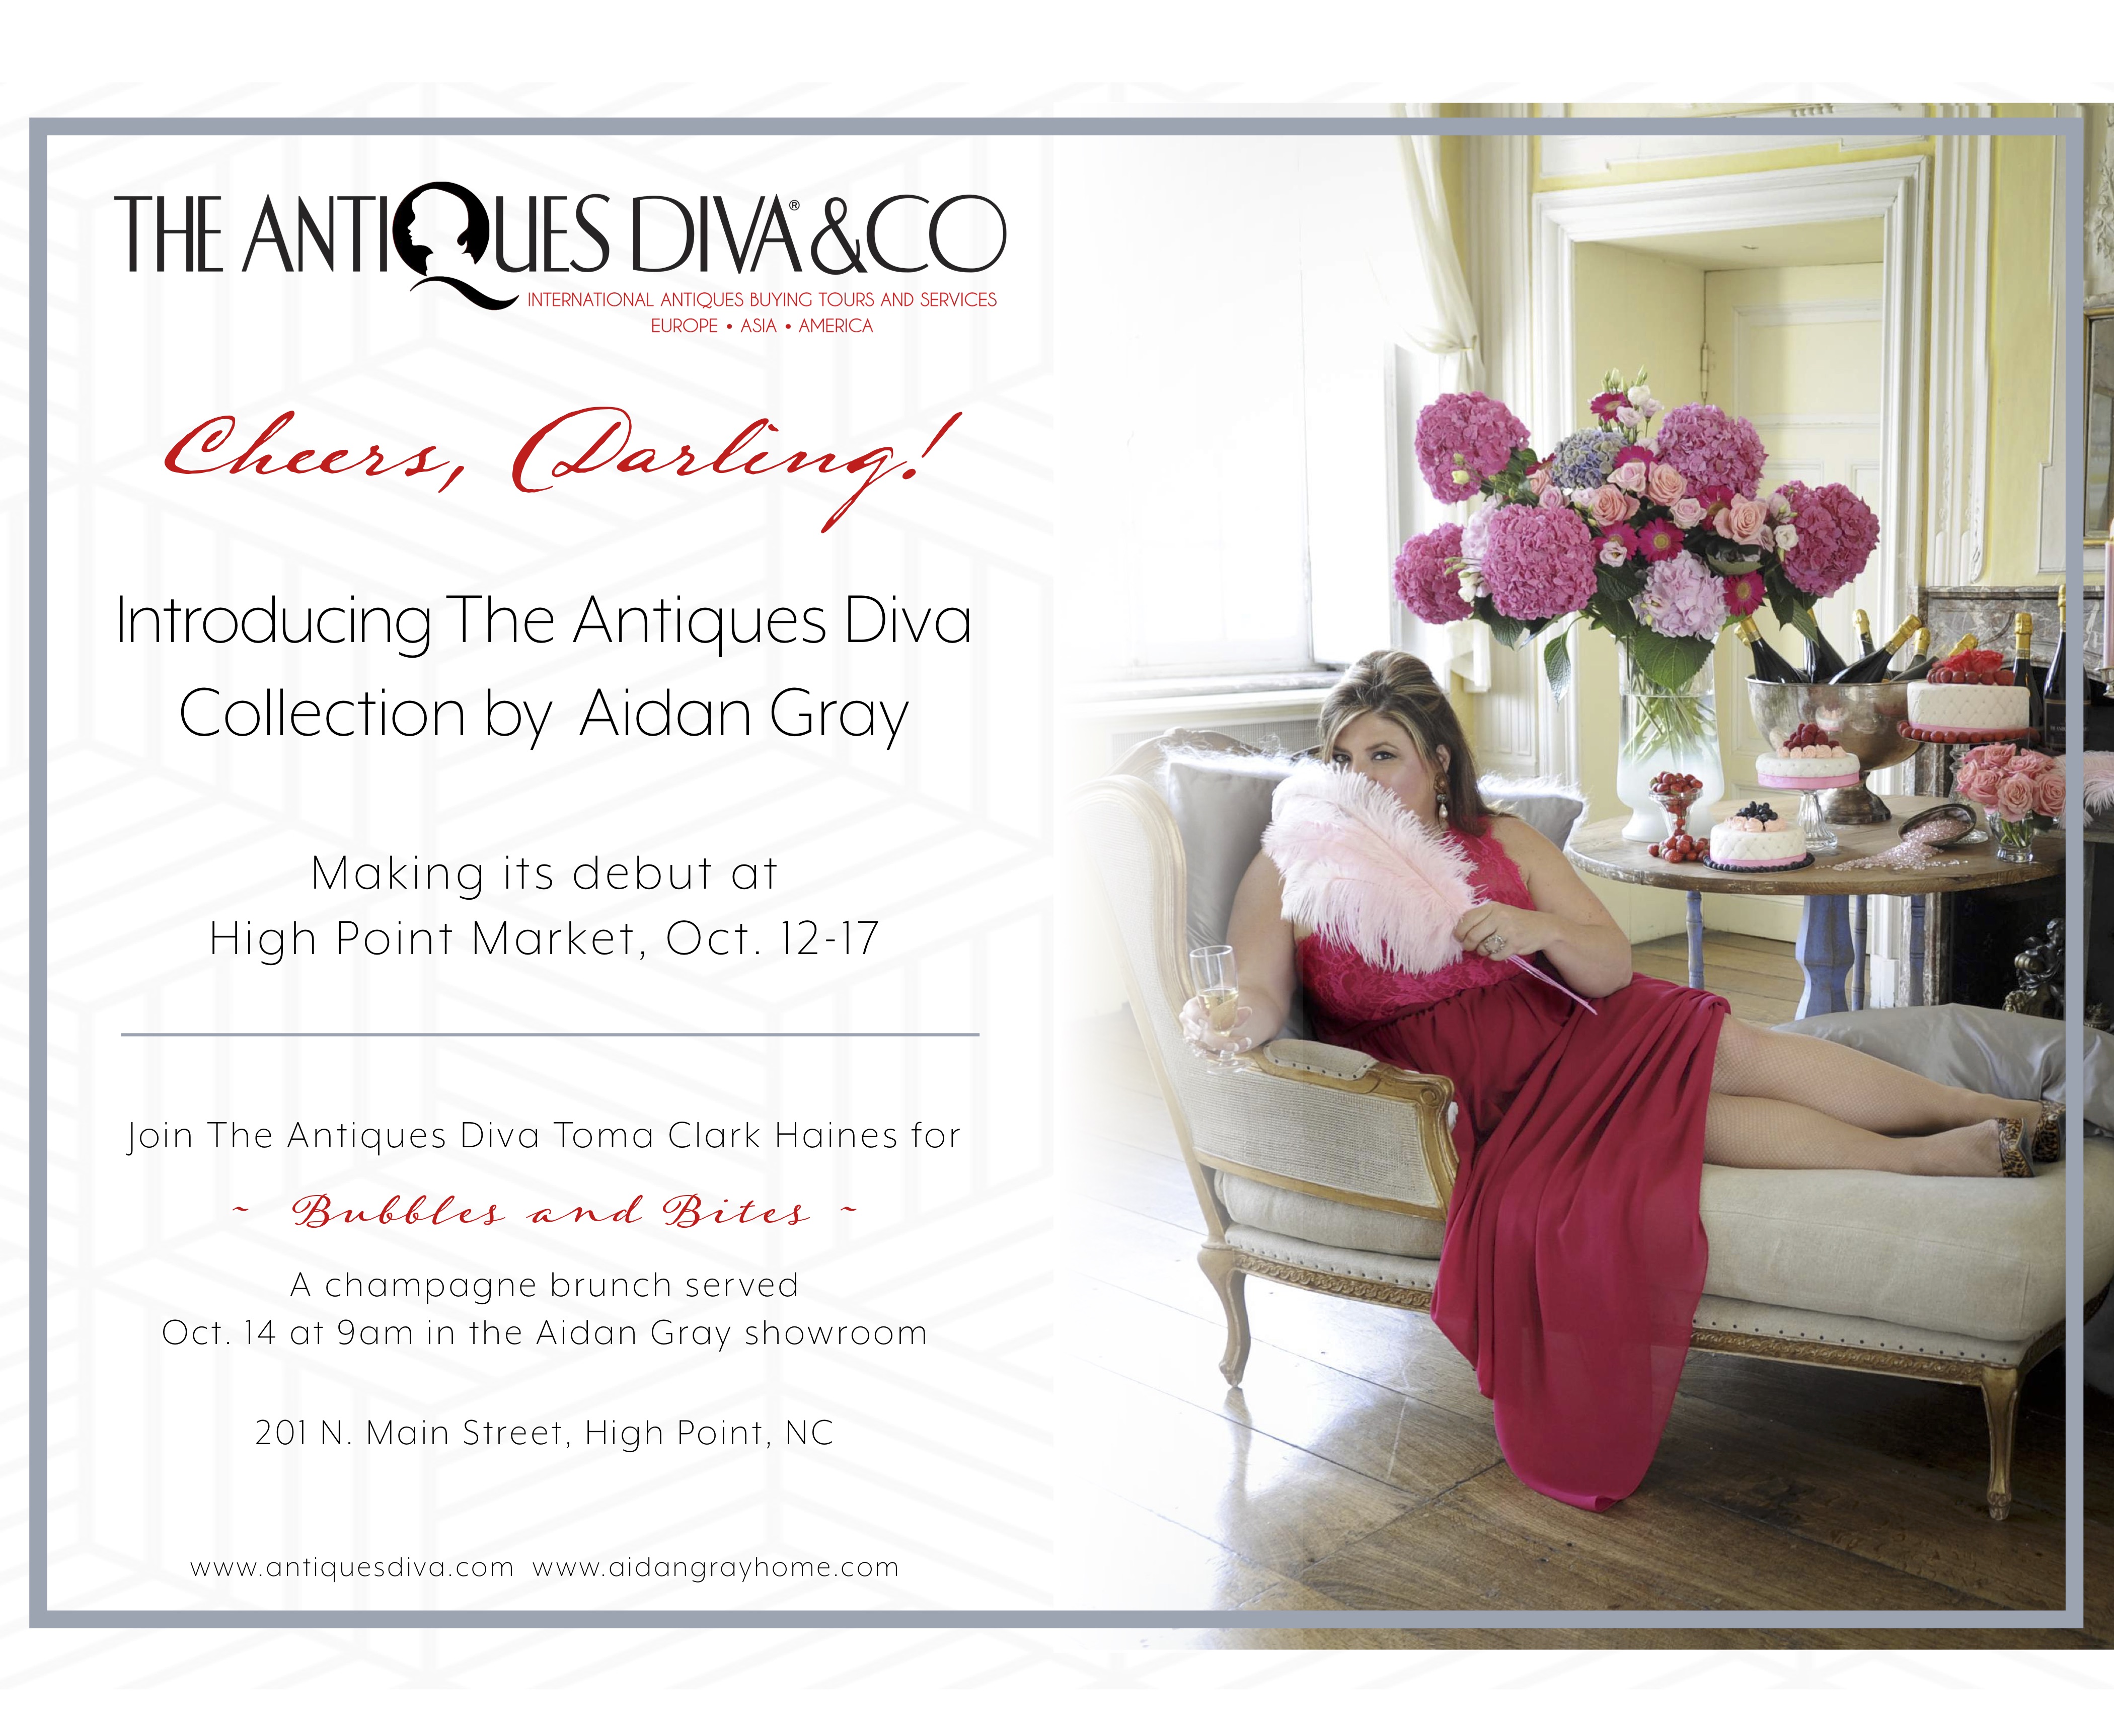 Bubbles and Bites: The Antiques Diva Collection by Aidan Gray Home launch event at HPMKT